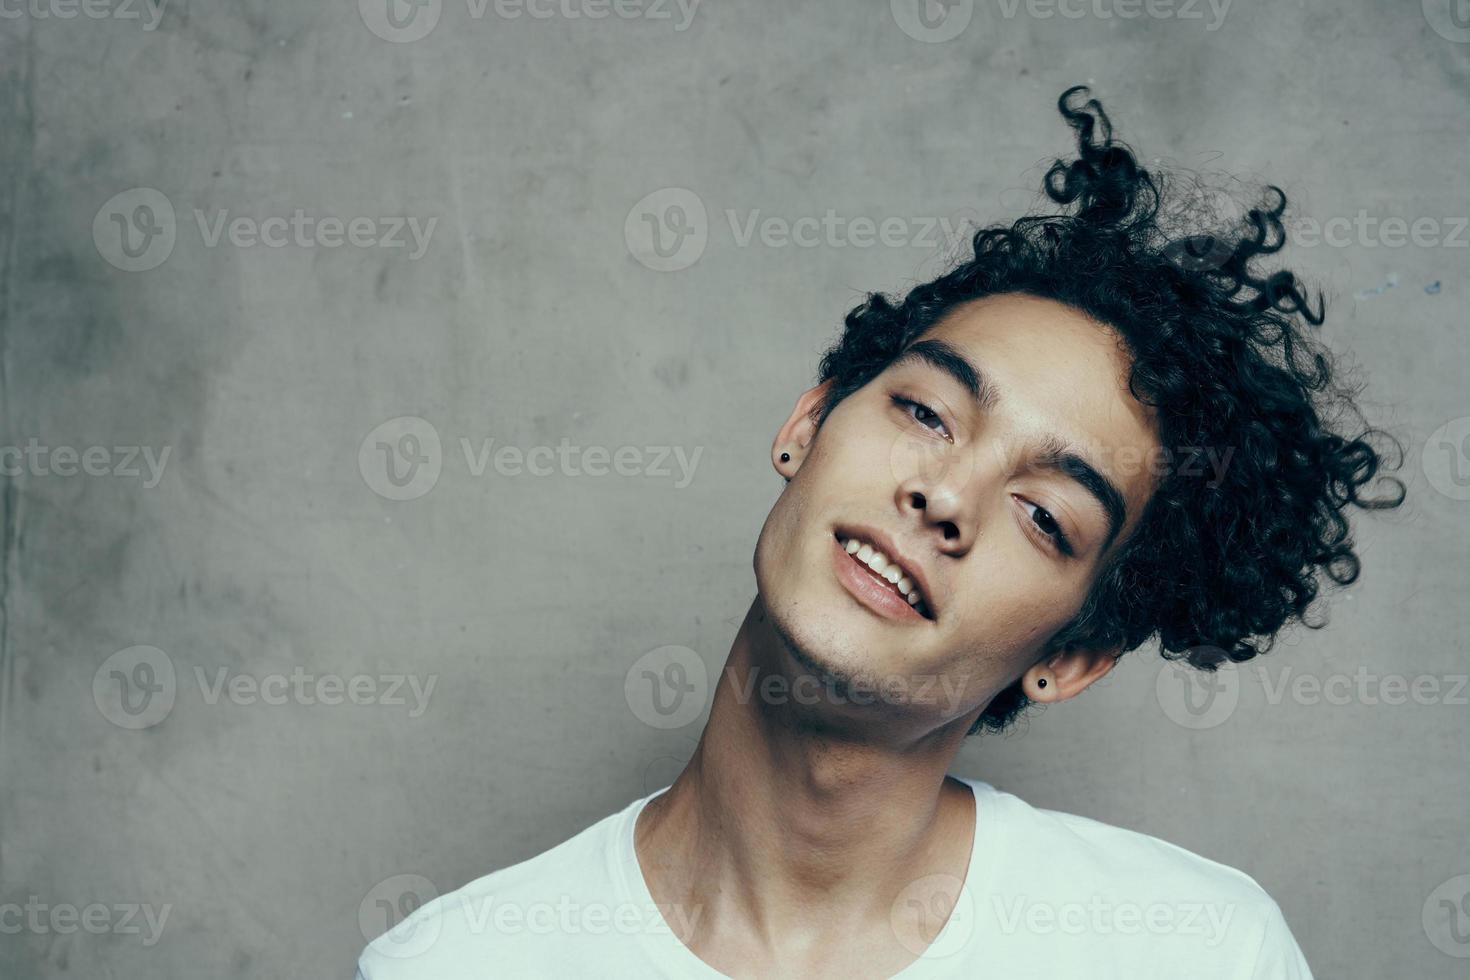 Cheerful guy with curly hair tilts his head to the side on a gray background photostudio model photo